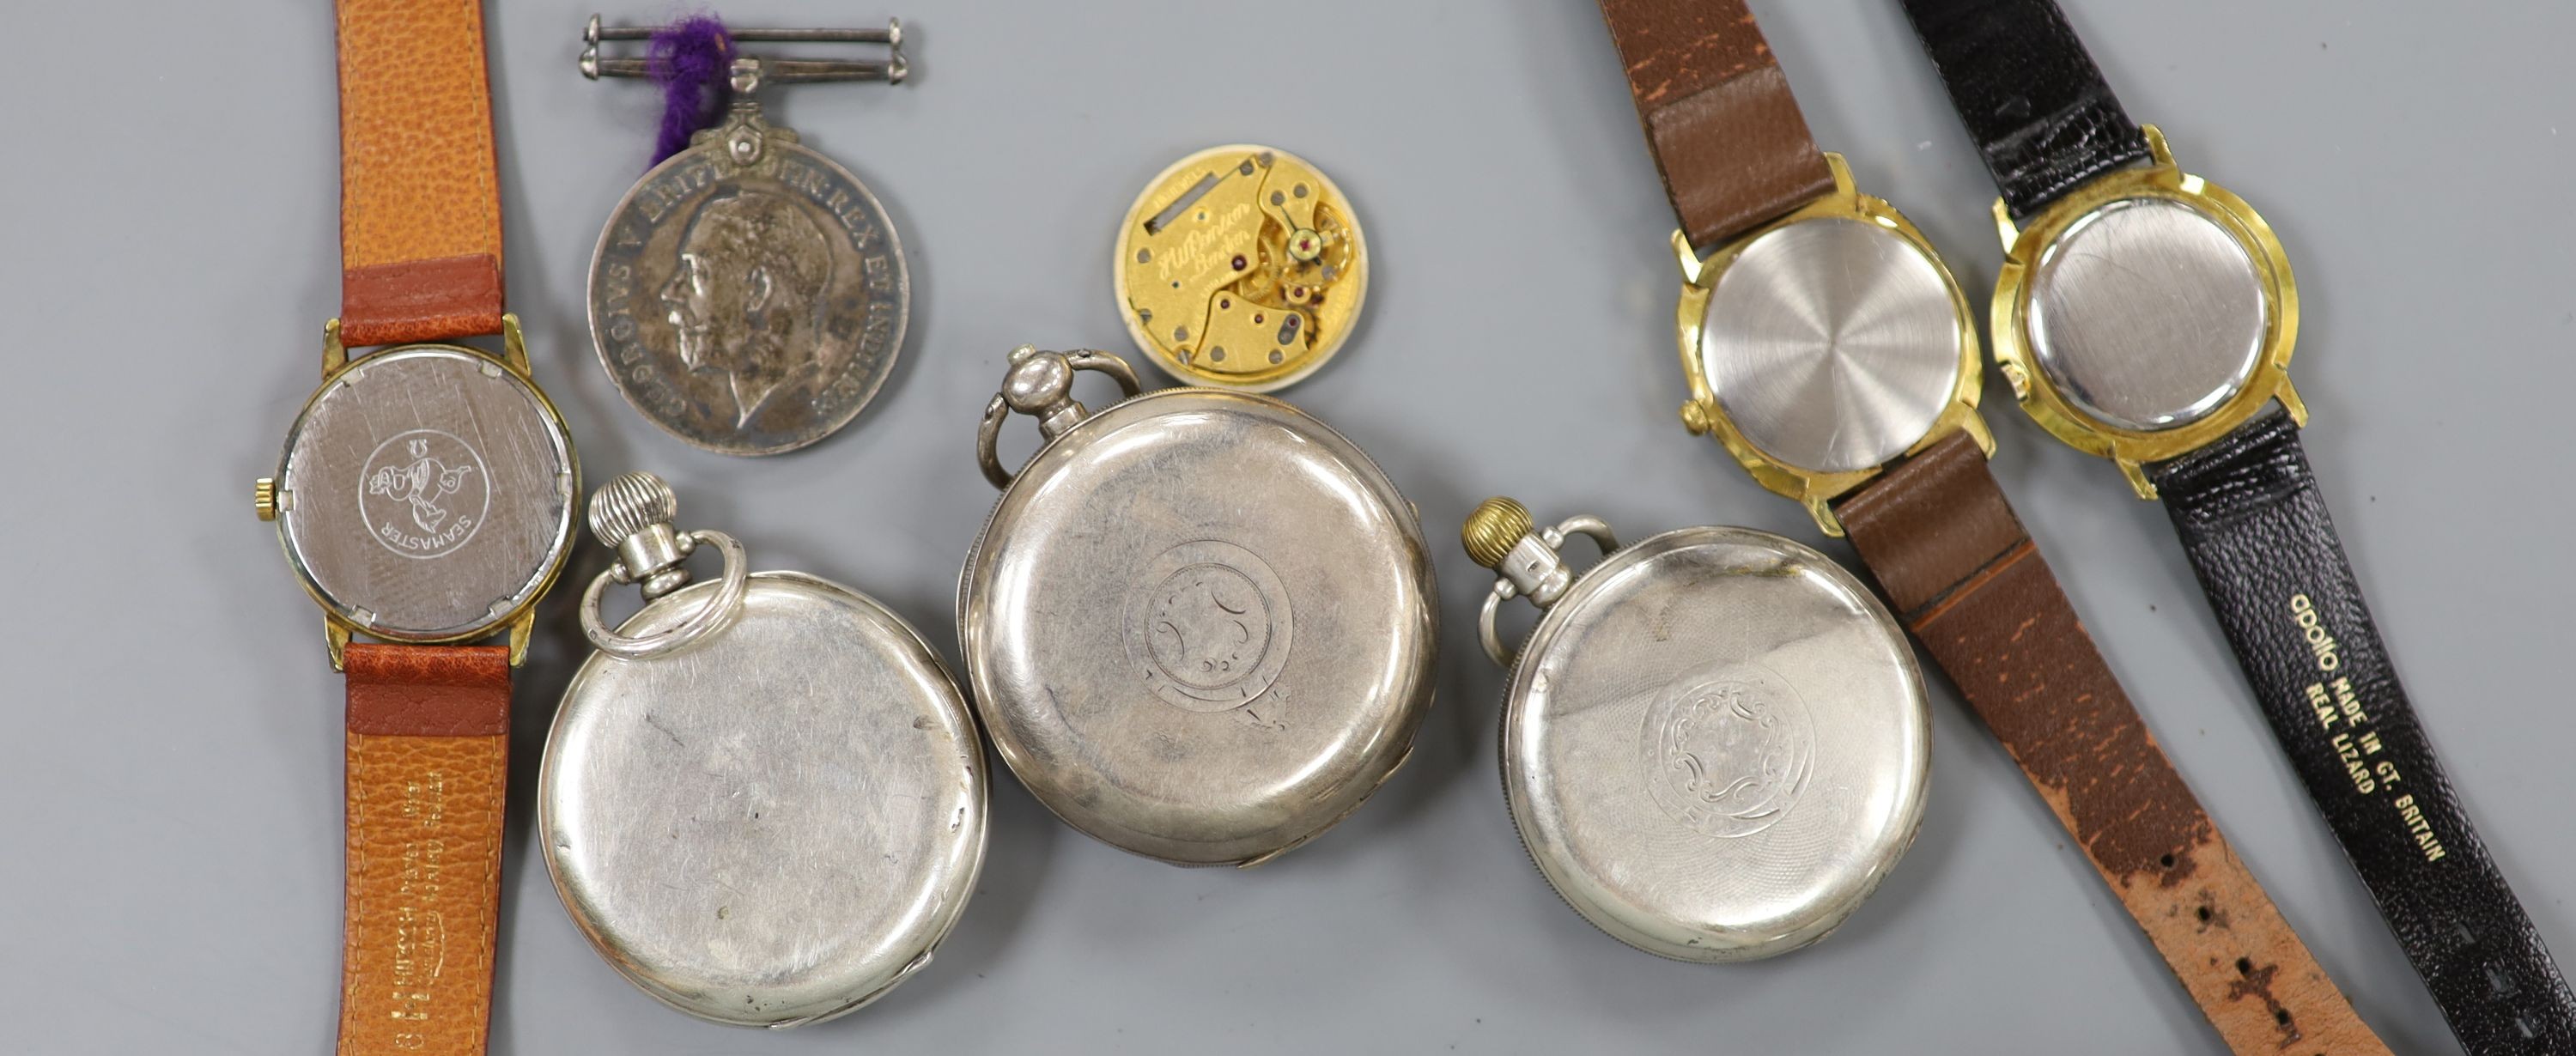 A gentleman's steel and gold plated Omega manual wind wrist watch, three other wrist watches, three pocket watches and a medal.